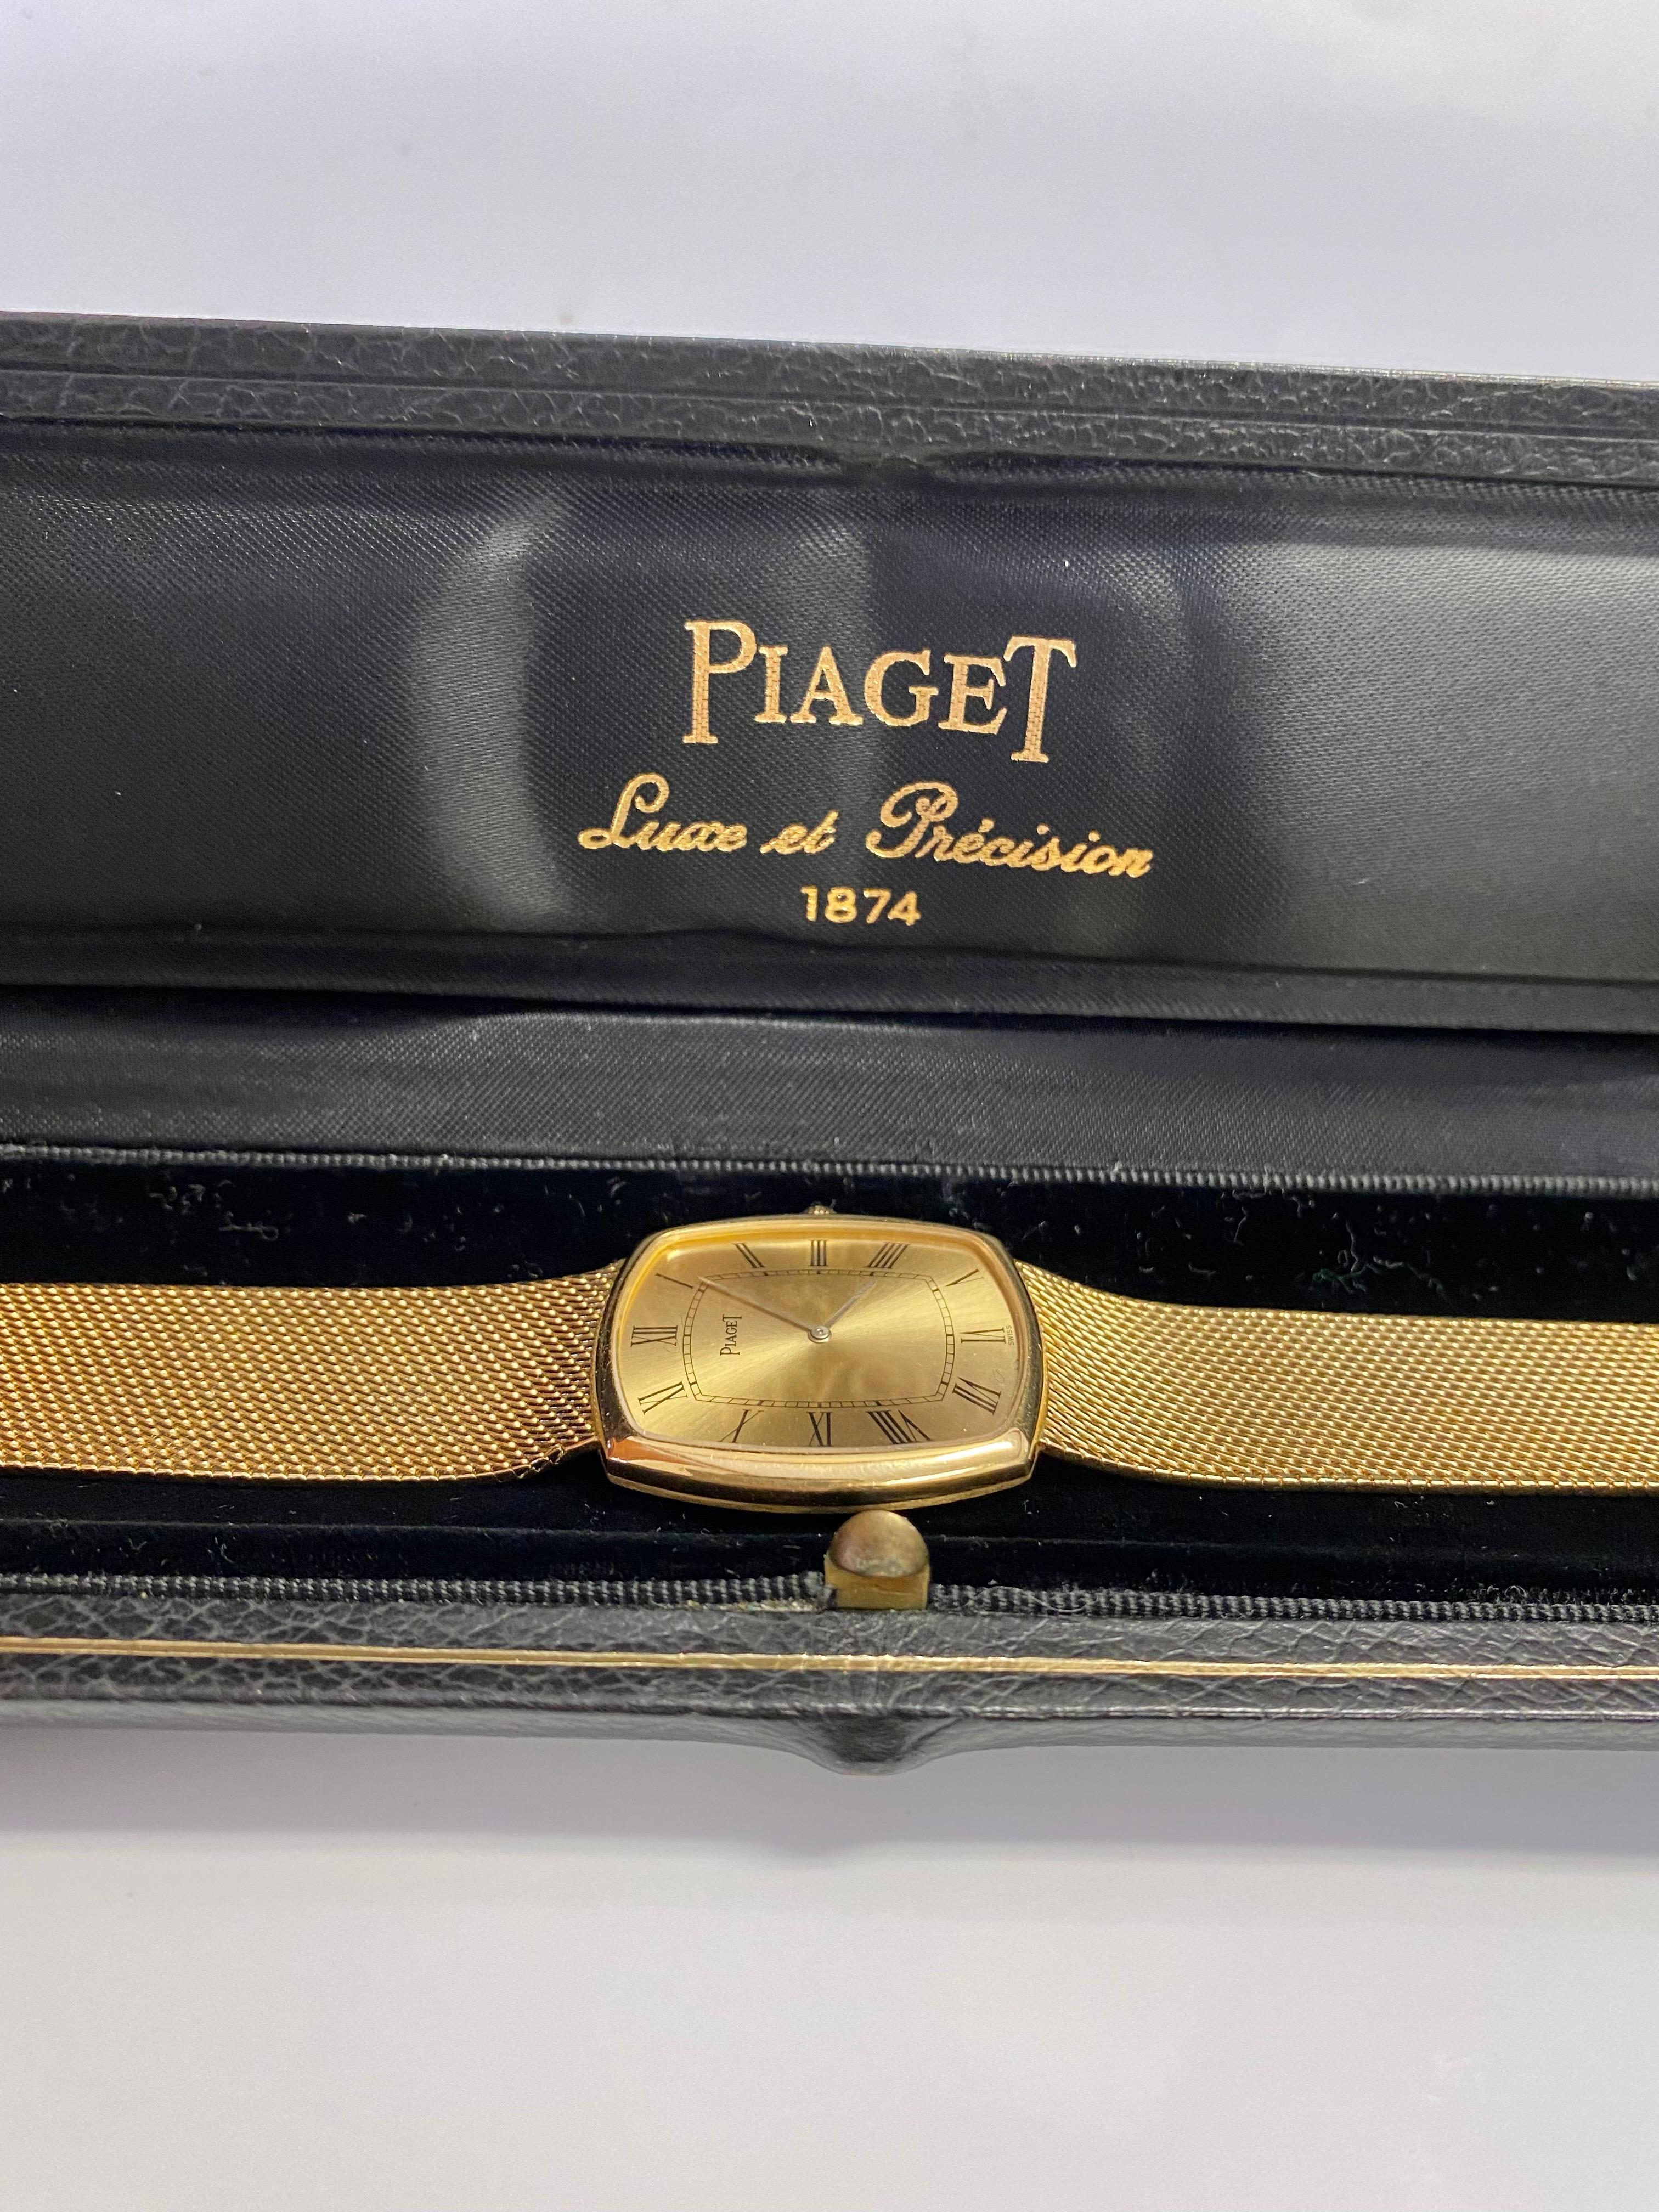 Piaget signed 18k solid gold vintage wristwatch. This vintage unisex watch is in near mint condition with little to no signs of wear to the naked eye. The dial in particular is of superlative condition. With elongated Roman Numeral hour markers and